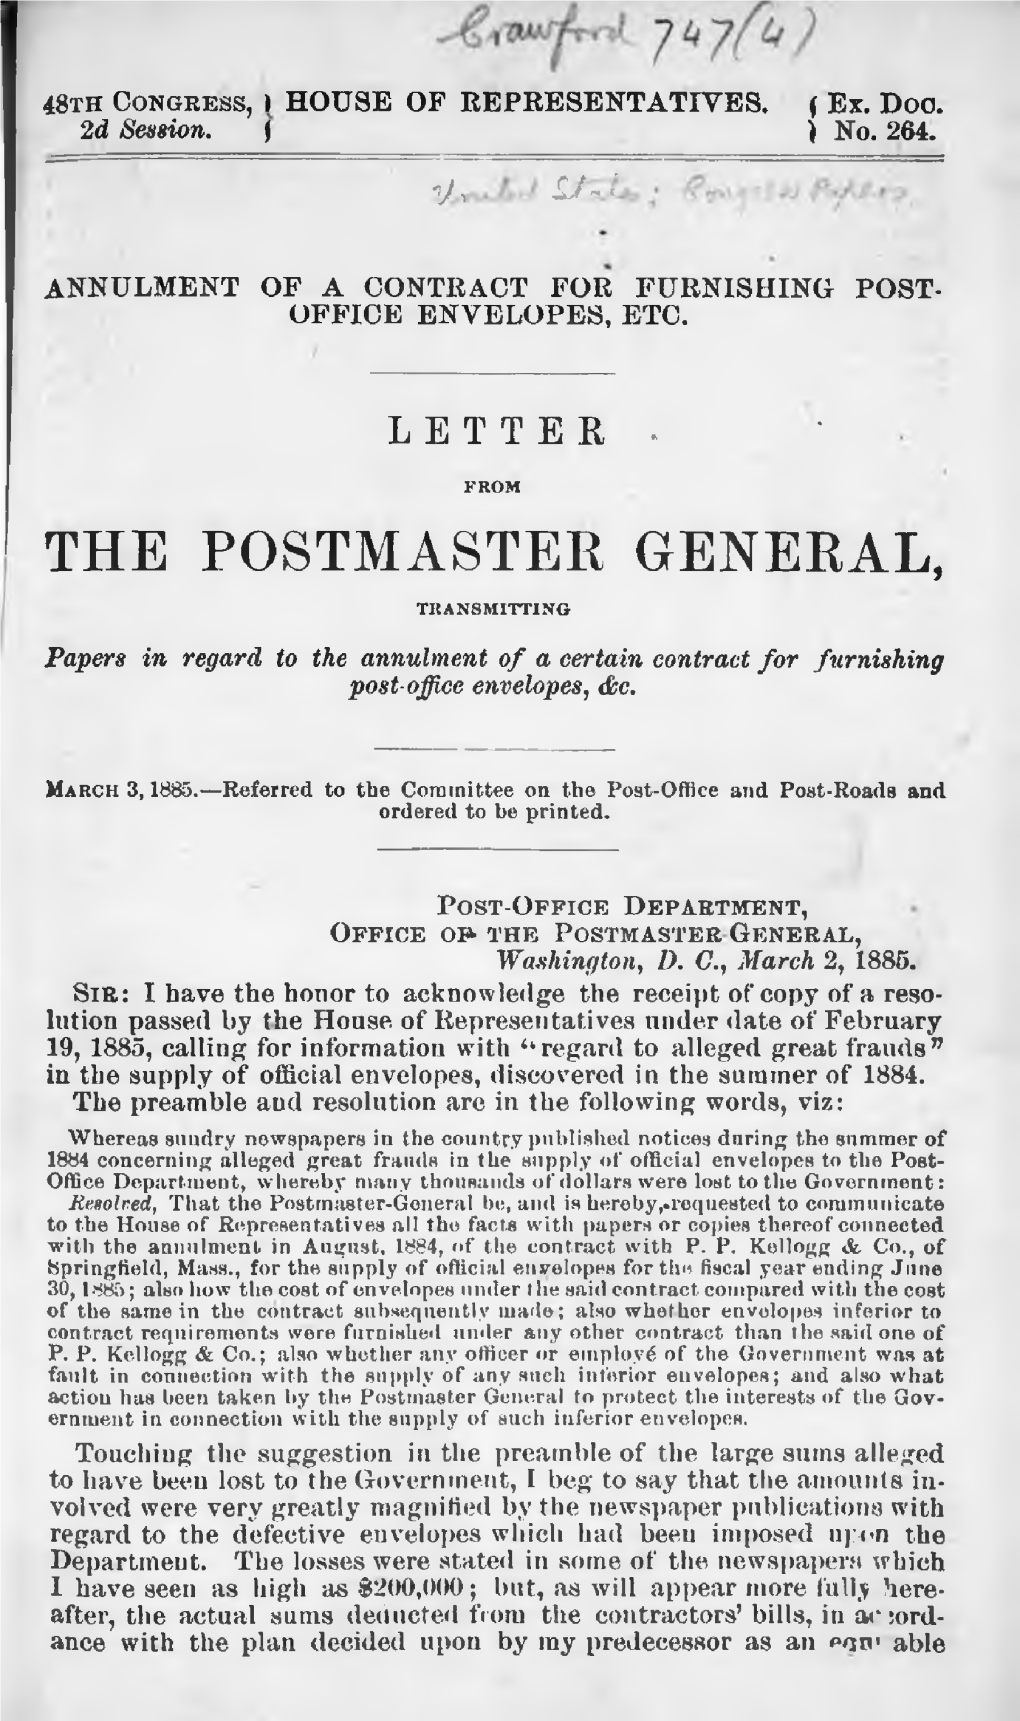 THE POSTMASTER GENERAL, TRANSMITTING Papers in Regard to the Annulment of a Certain Contract for Furnishing Post-Office Envelopes, &C